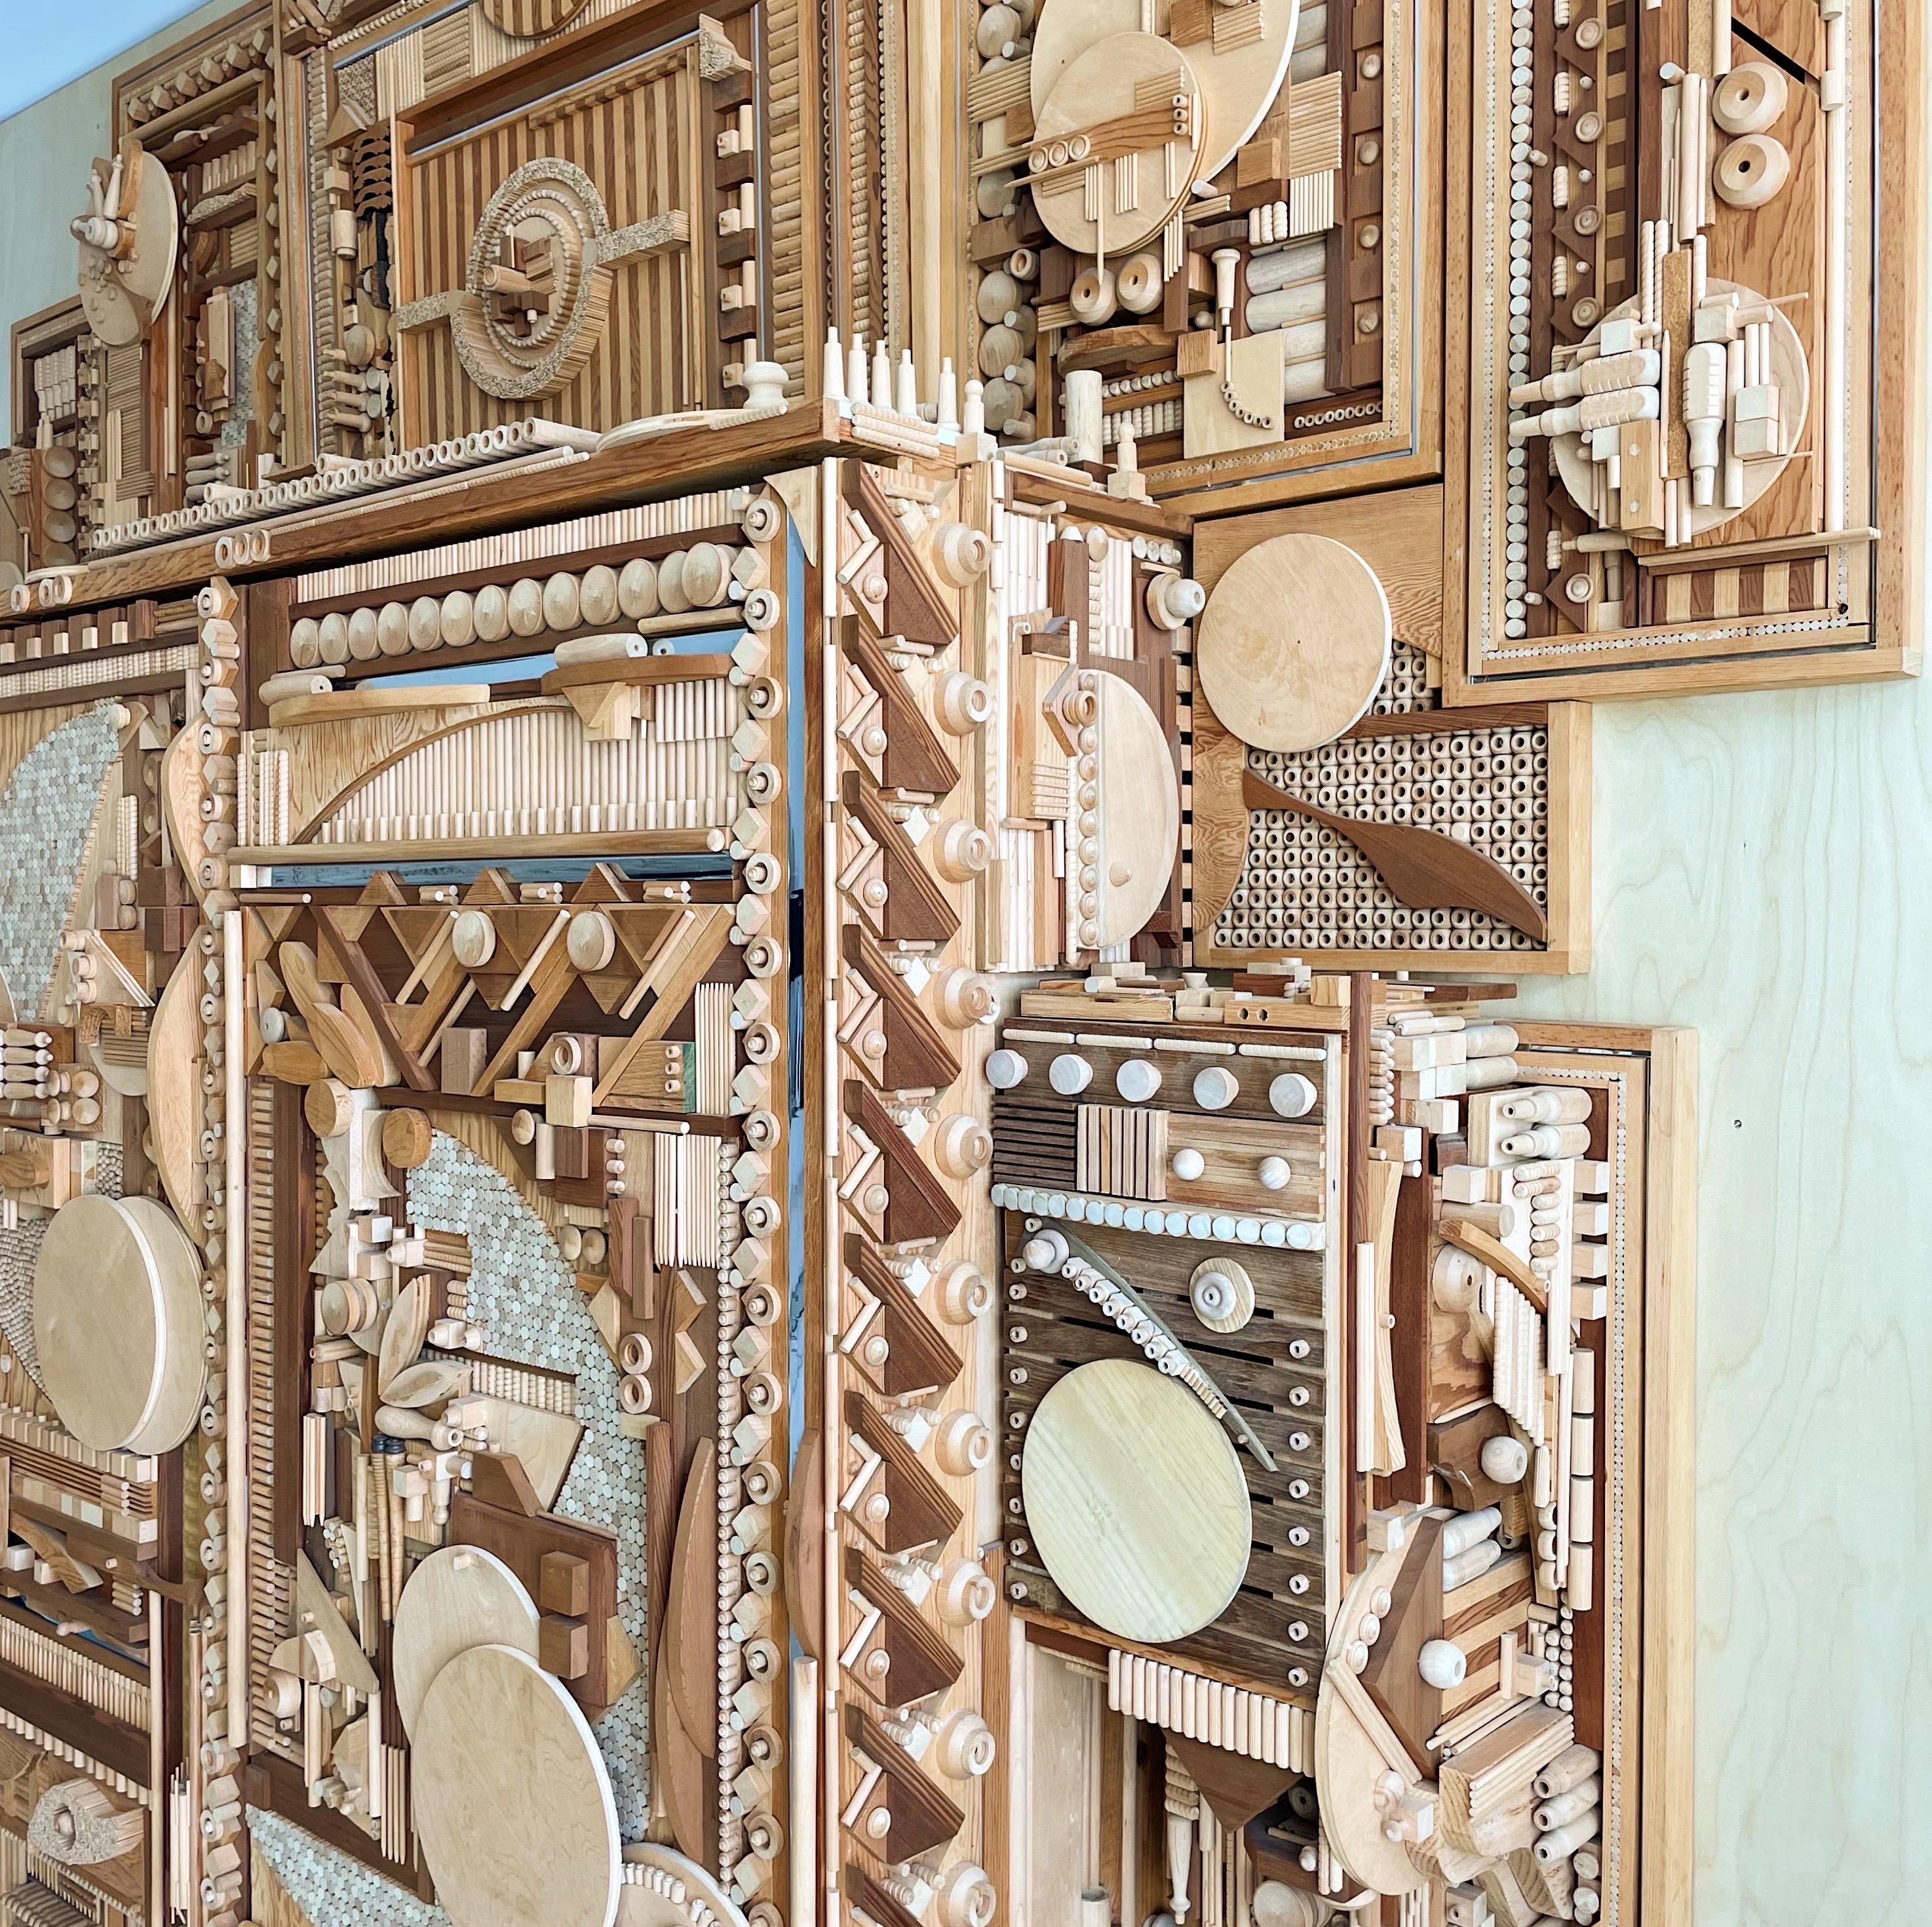 Looking for a statement piece to add to your home or office? Look no further than this one-of-a-kind monumental cabinet, by Robert Salerolli, purchased directly from the original client, Mr. Salleroli designed it for.   This incredible piece was